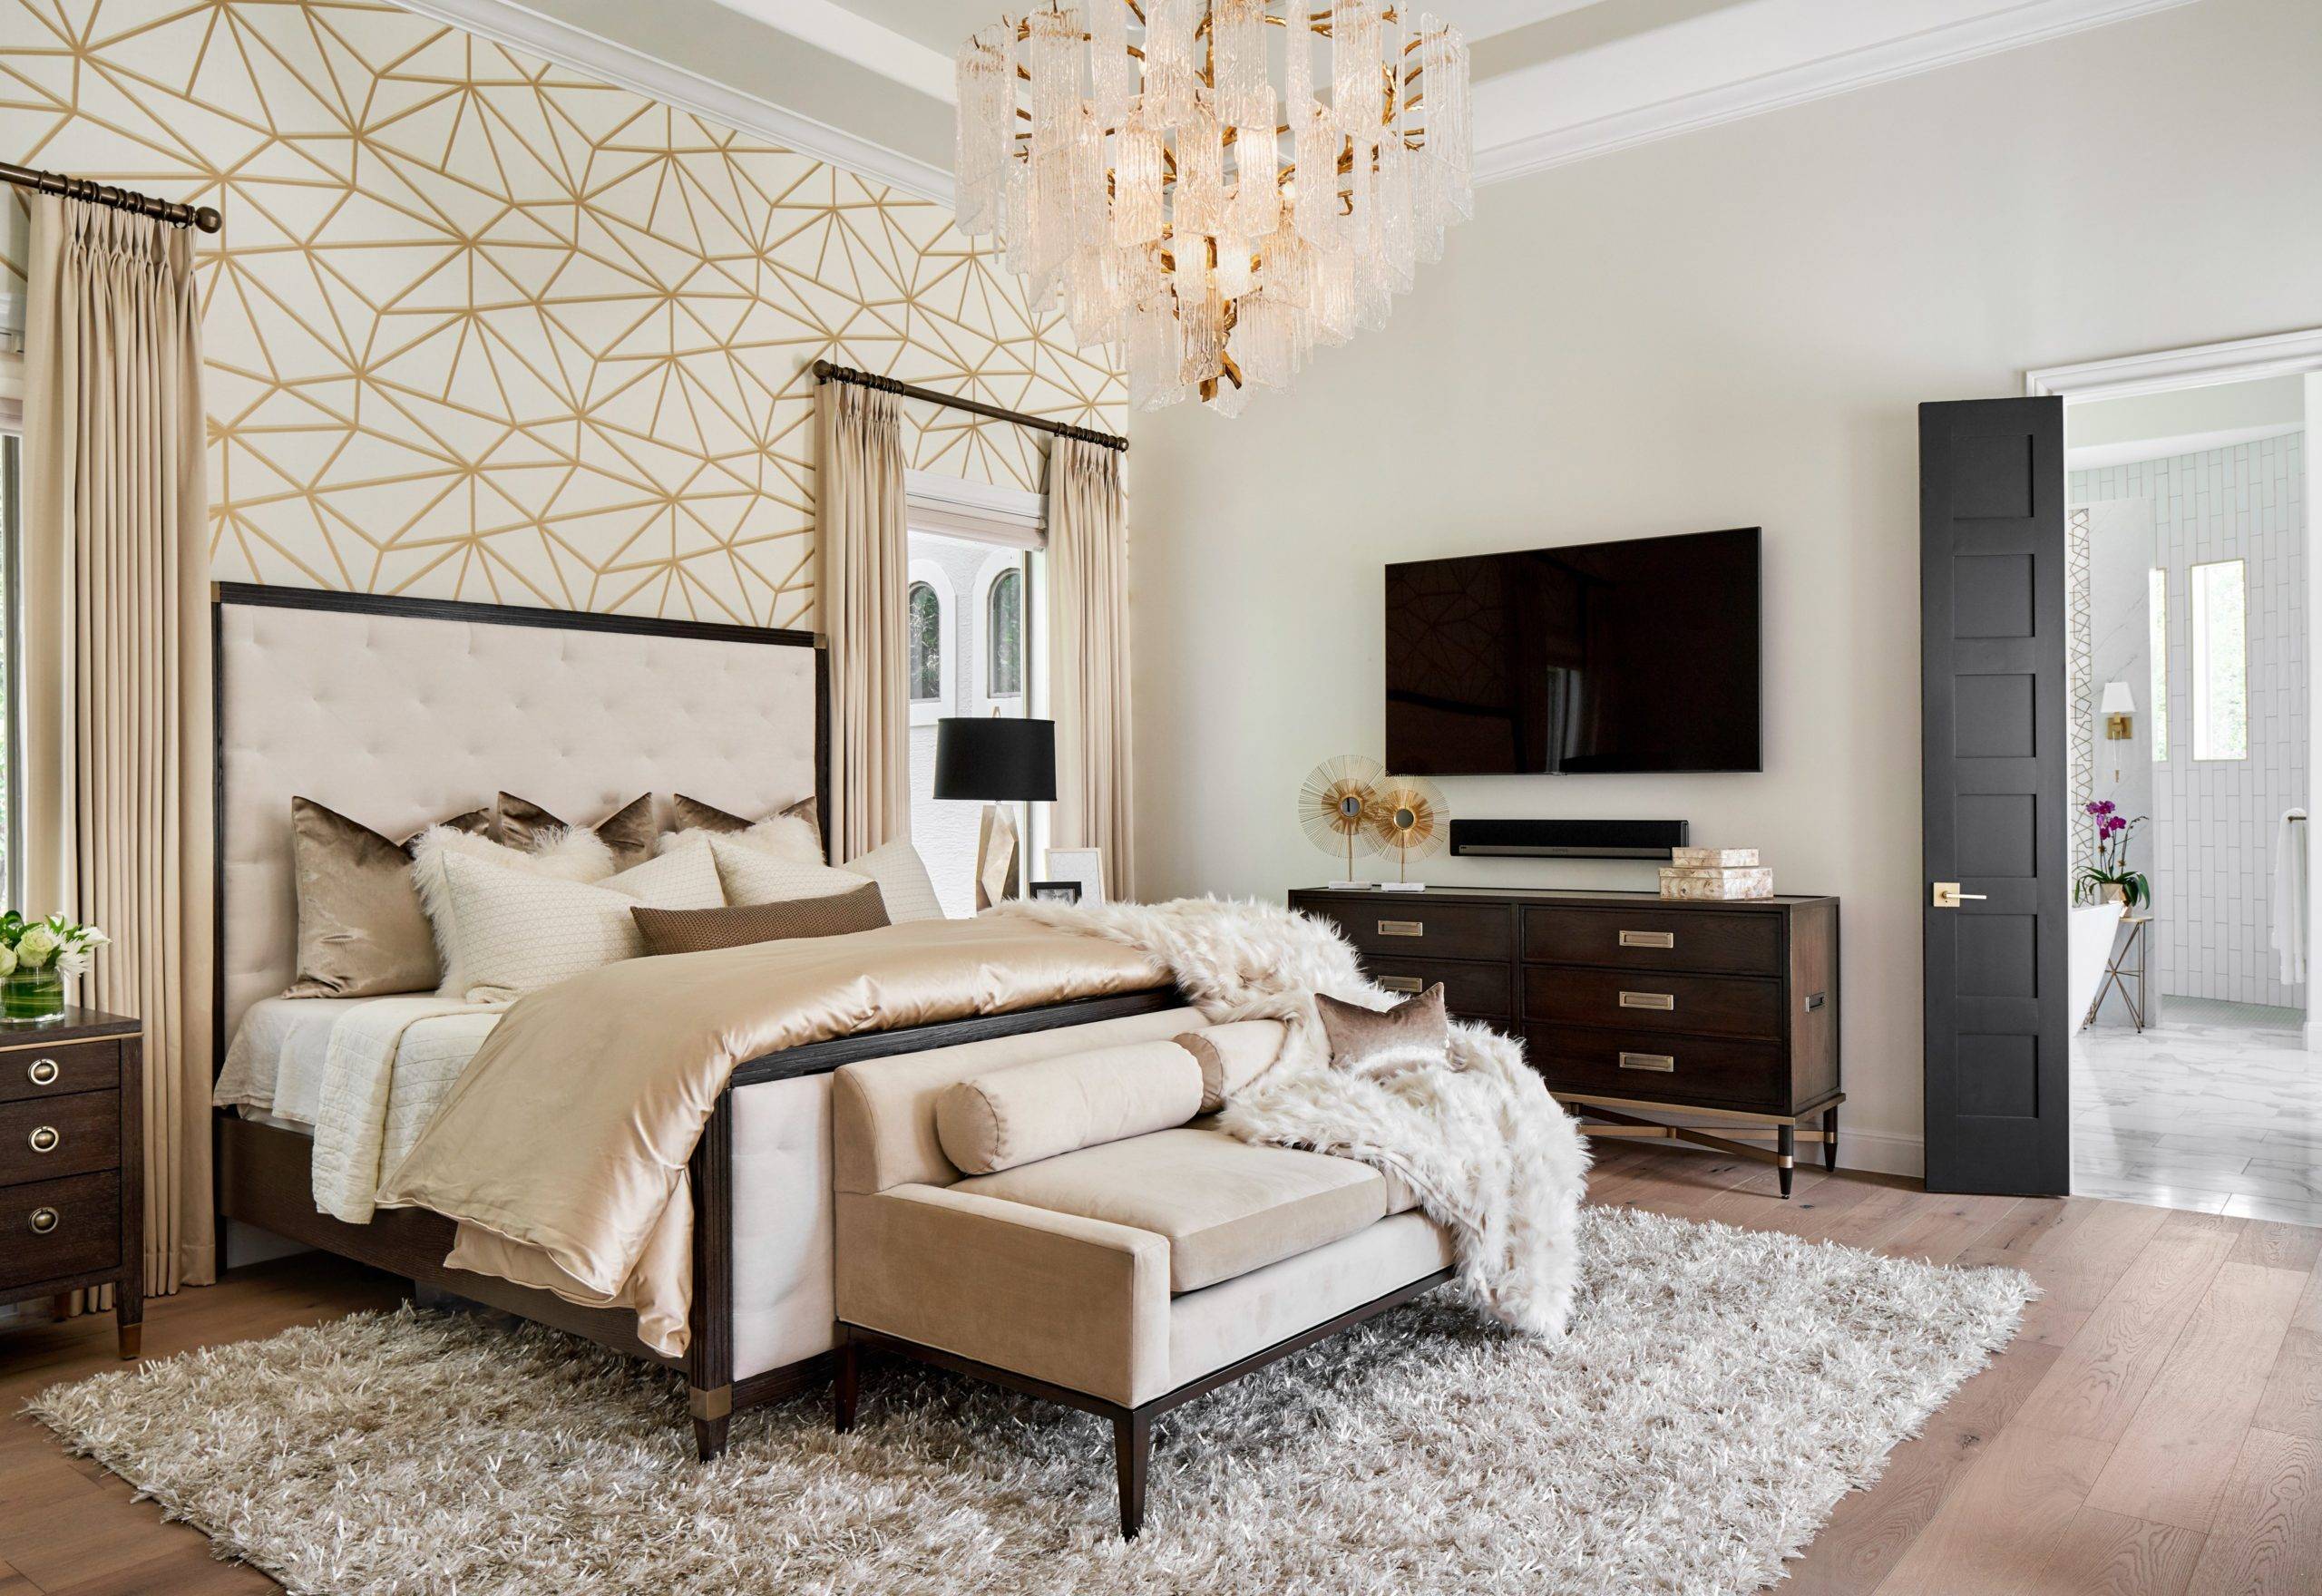 Geometric wallpaper for bedroom (from Houzz)